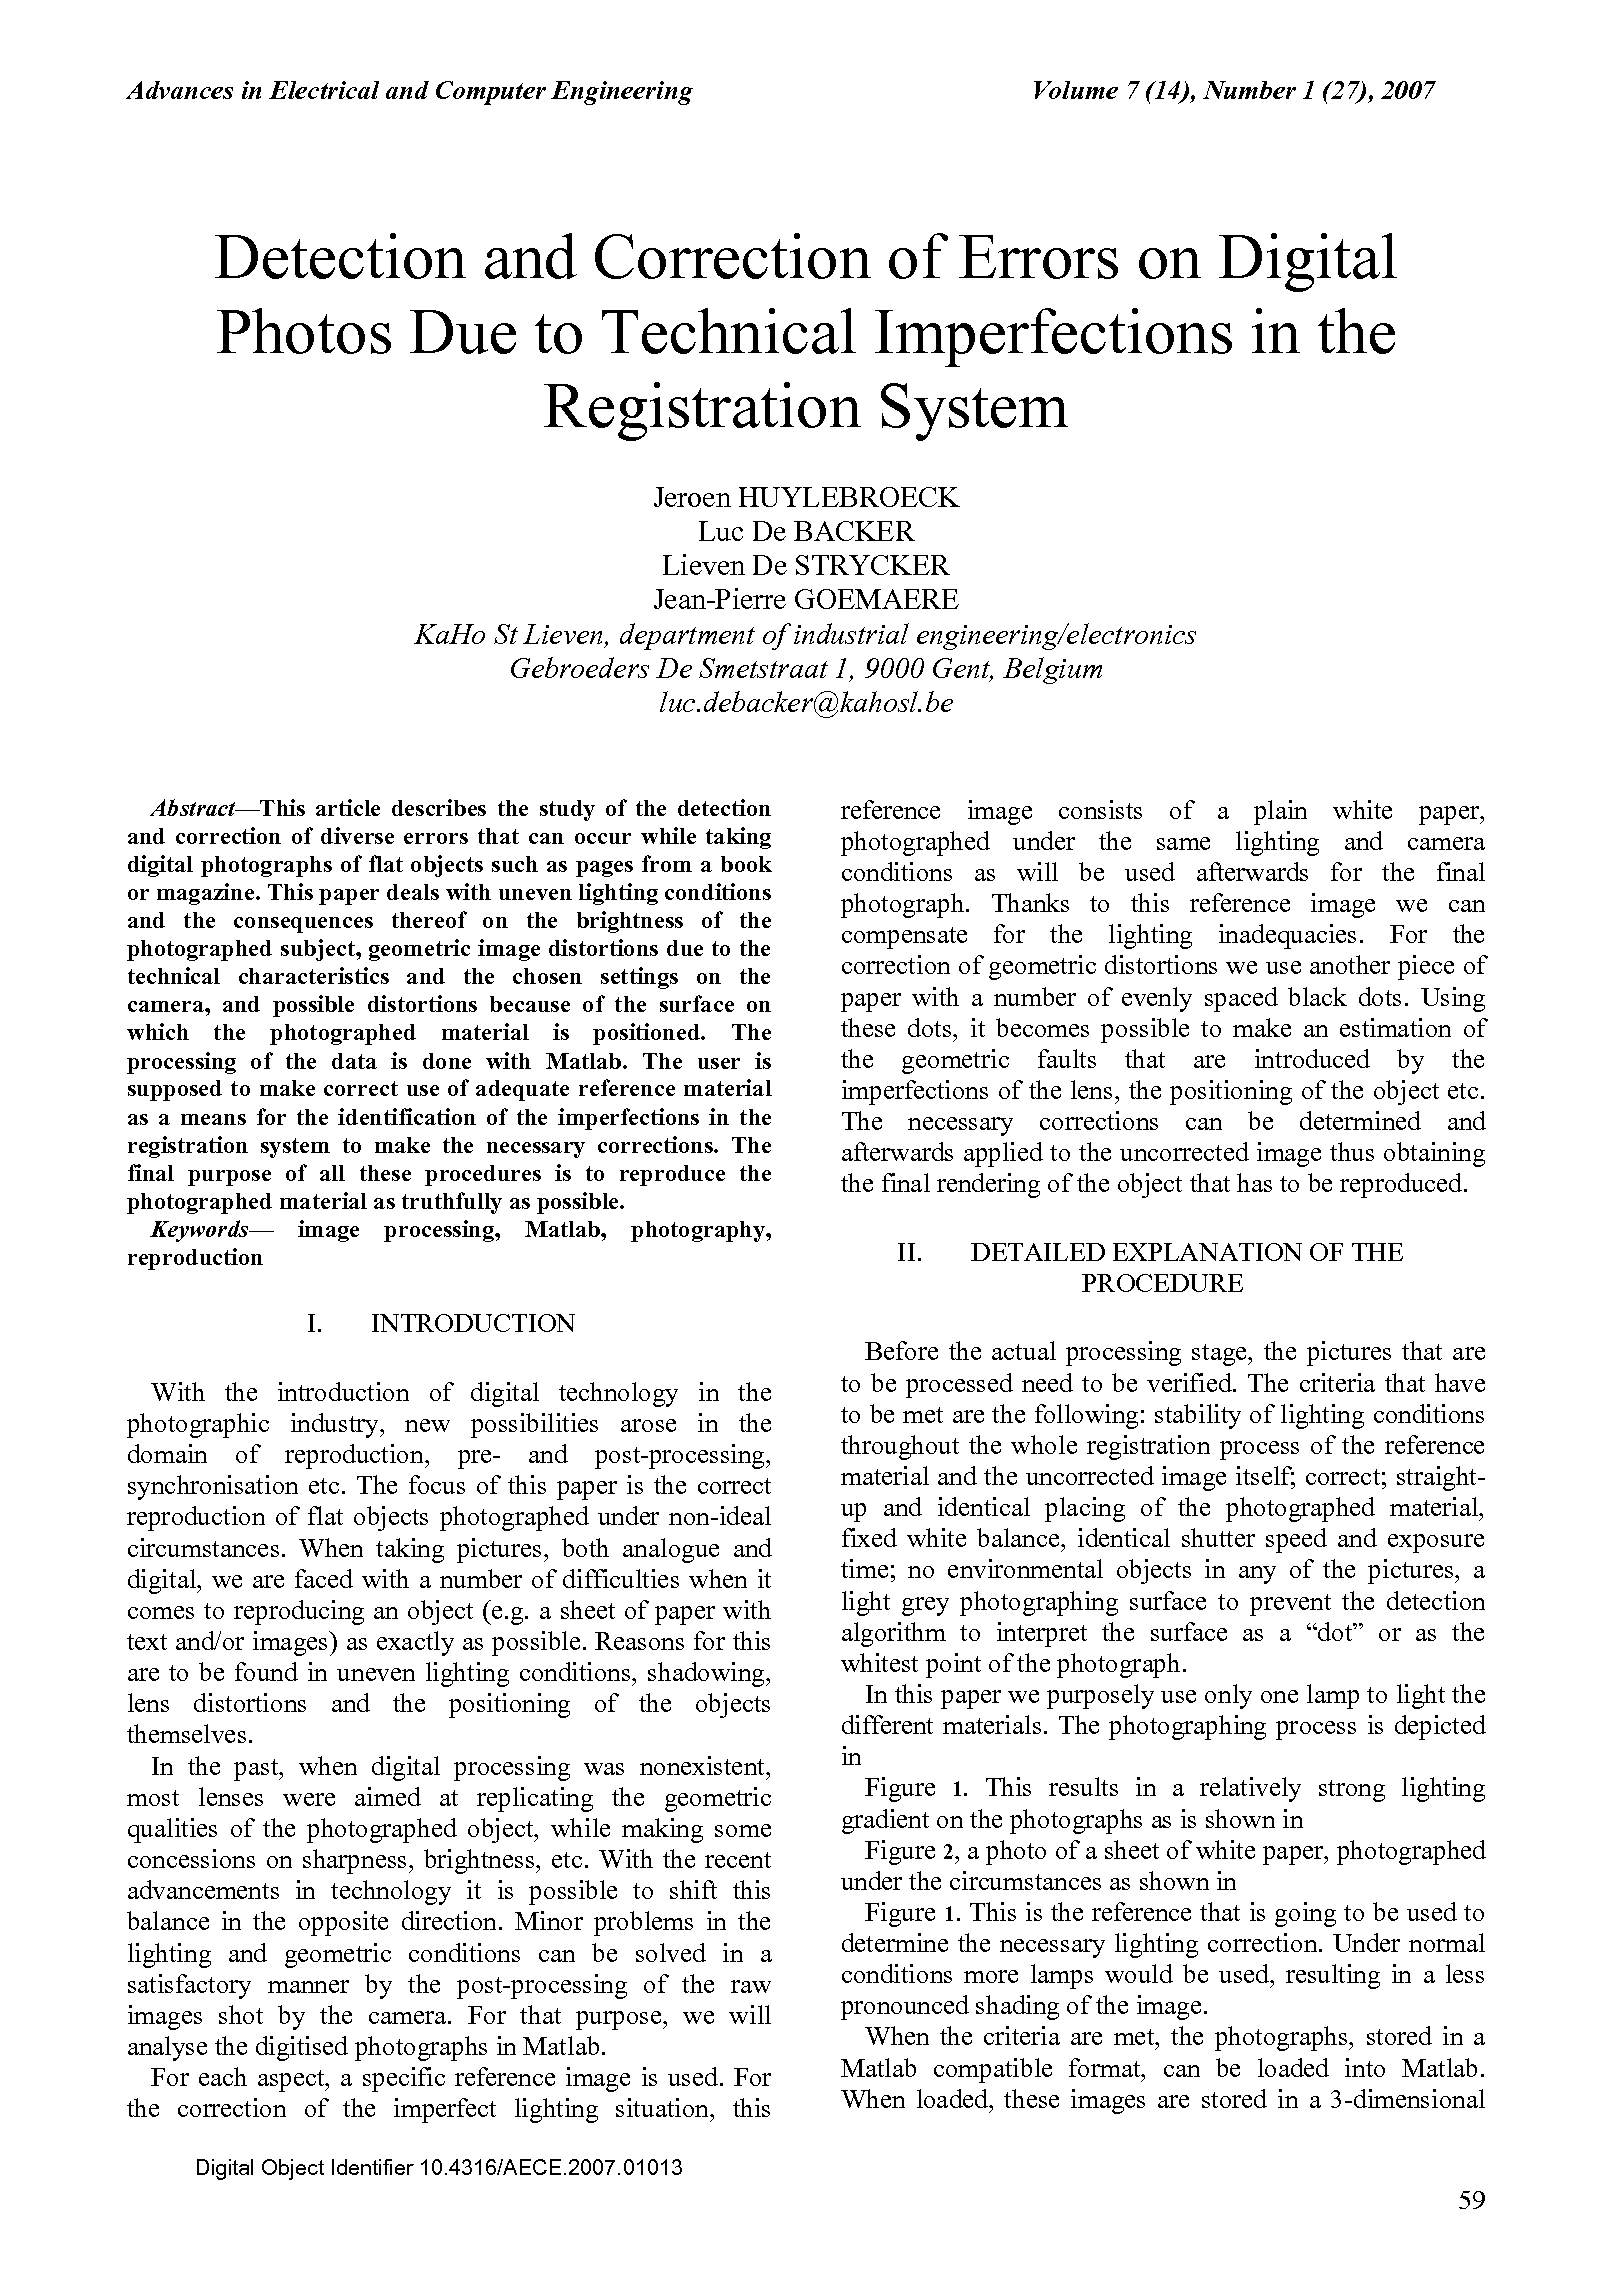 PDF Quickview for paper with DOI:10.4316/AECE.2007.01013